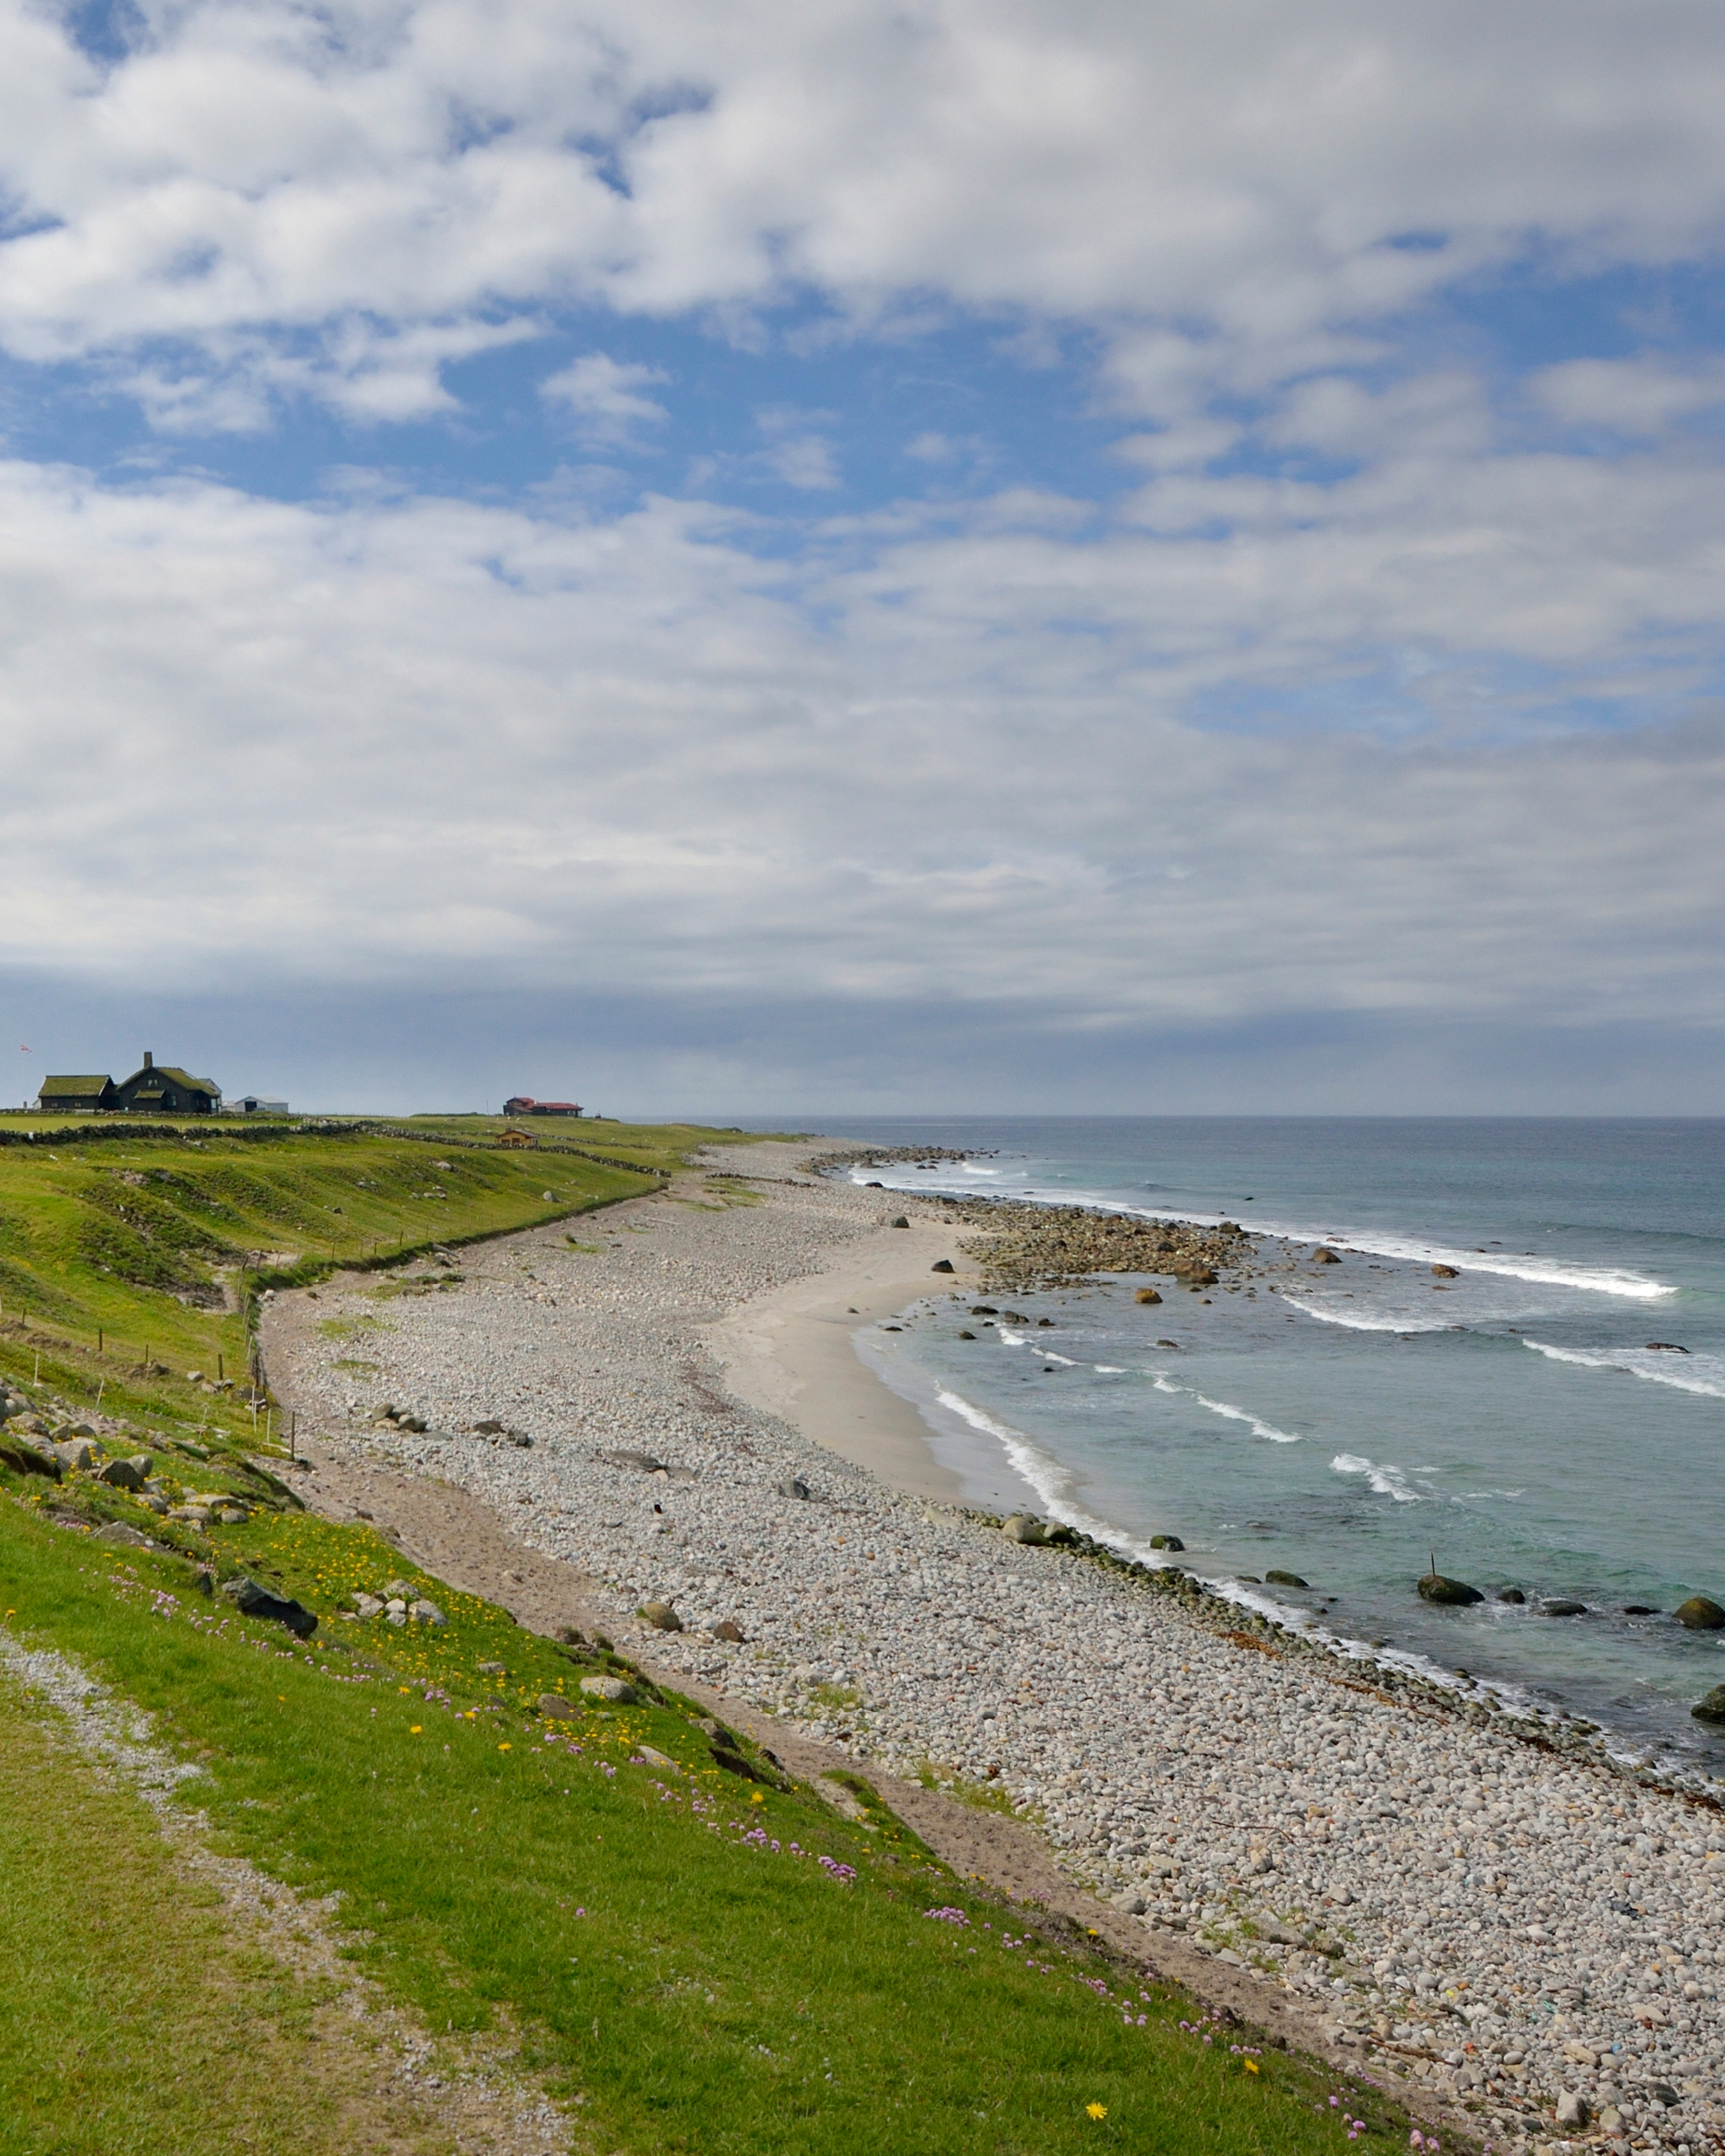 Jæren with its long beaches and stone fences.